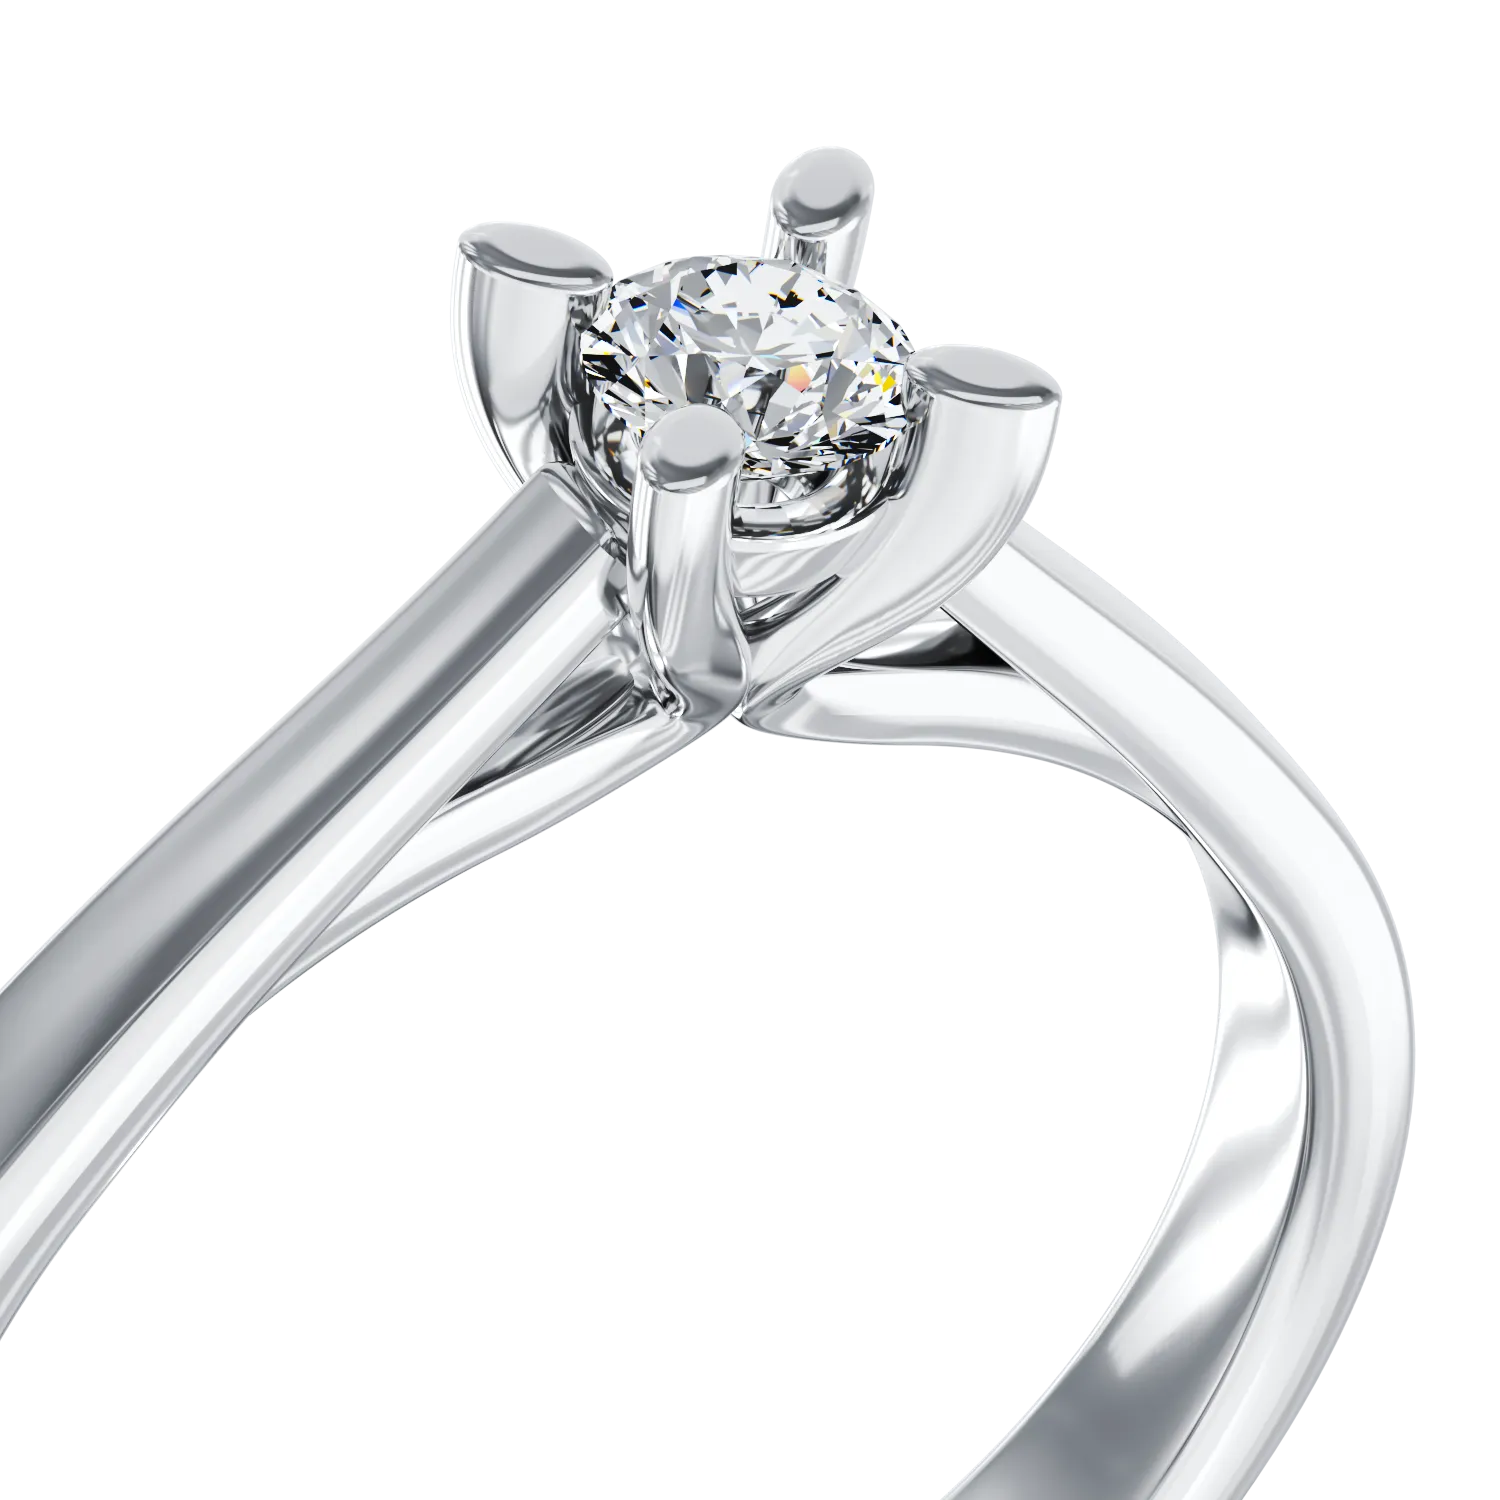 18K white gold engagement ring with a 0.2ct solitaire diamond